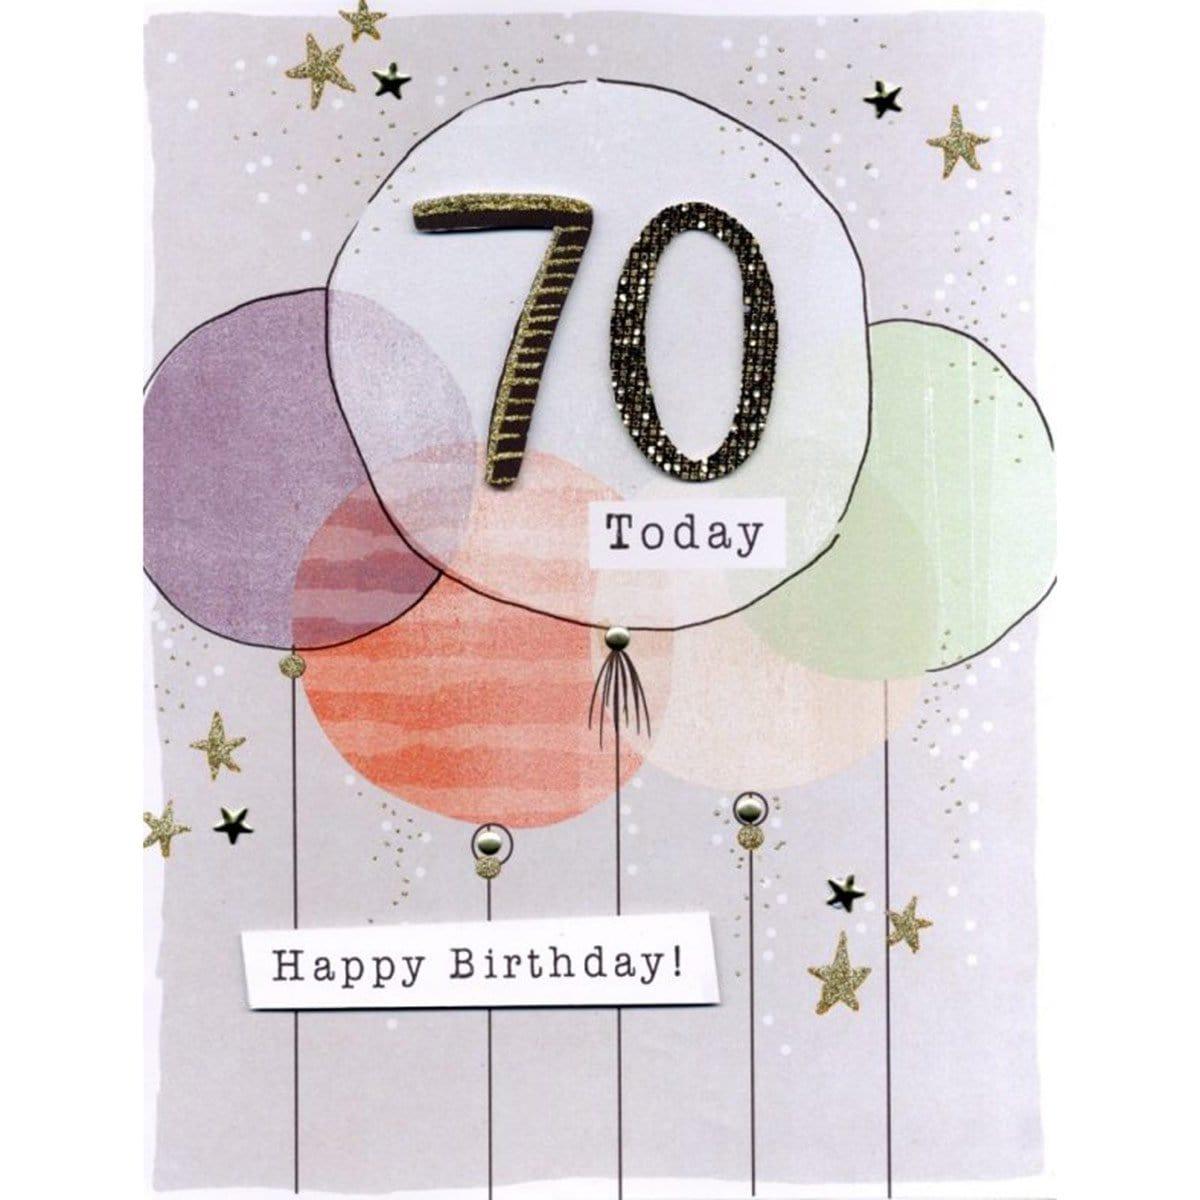 Buy Greeting Cards Gigantic Card, On Your 70Th Birthday sold at Party Expert